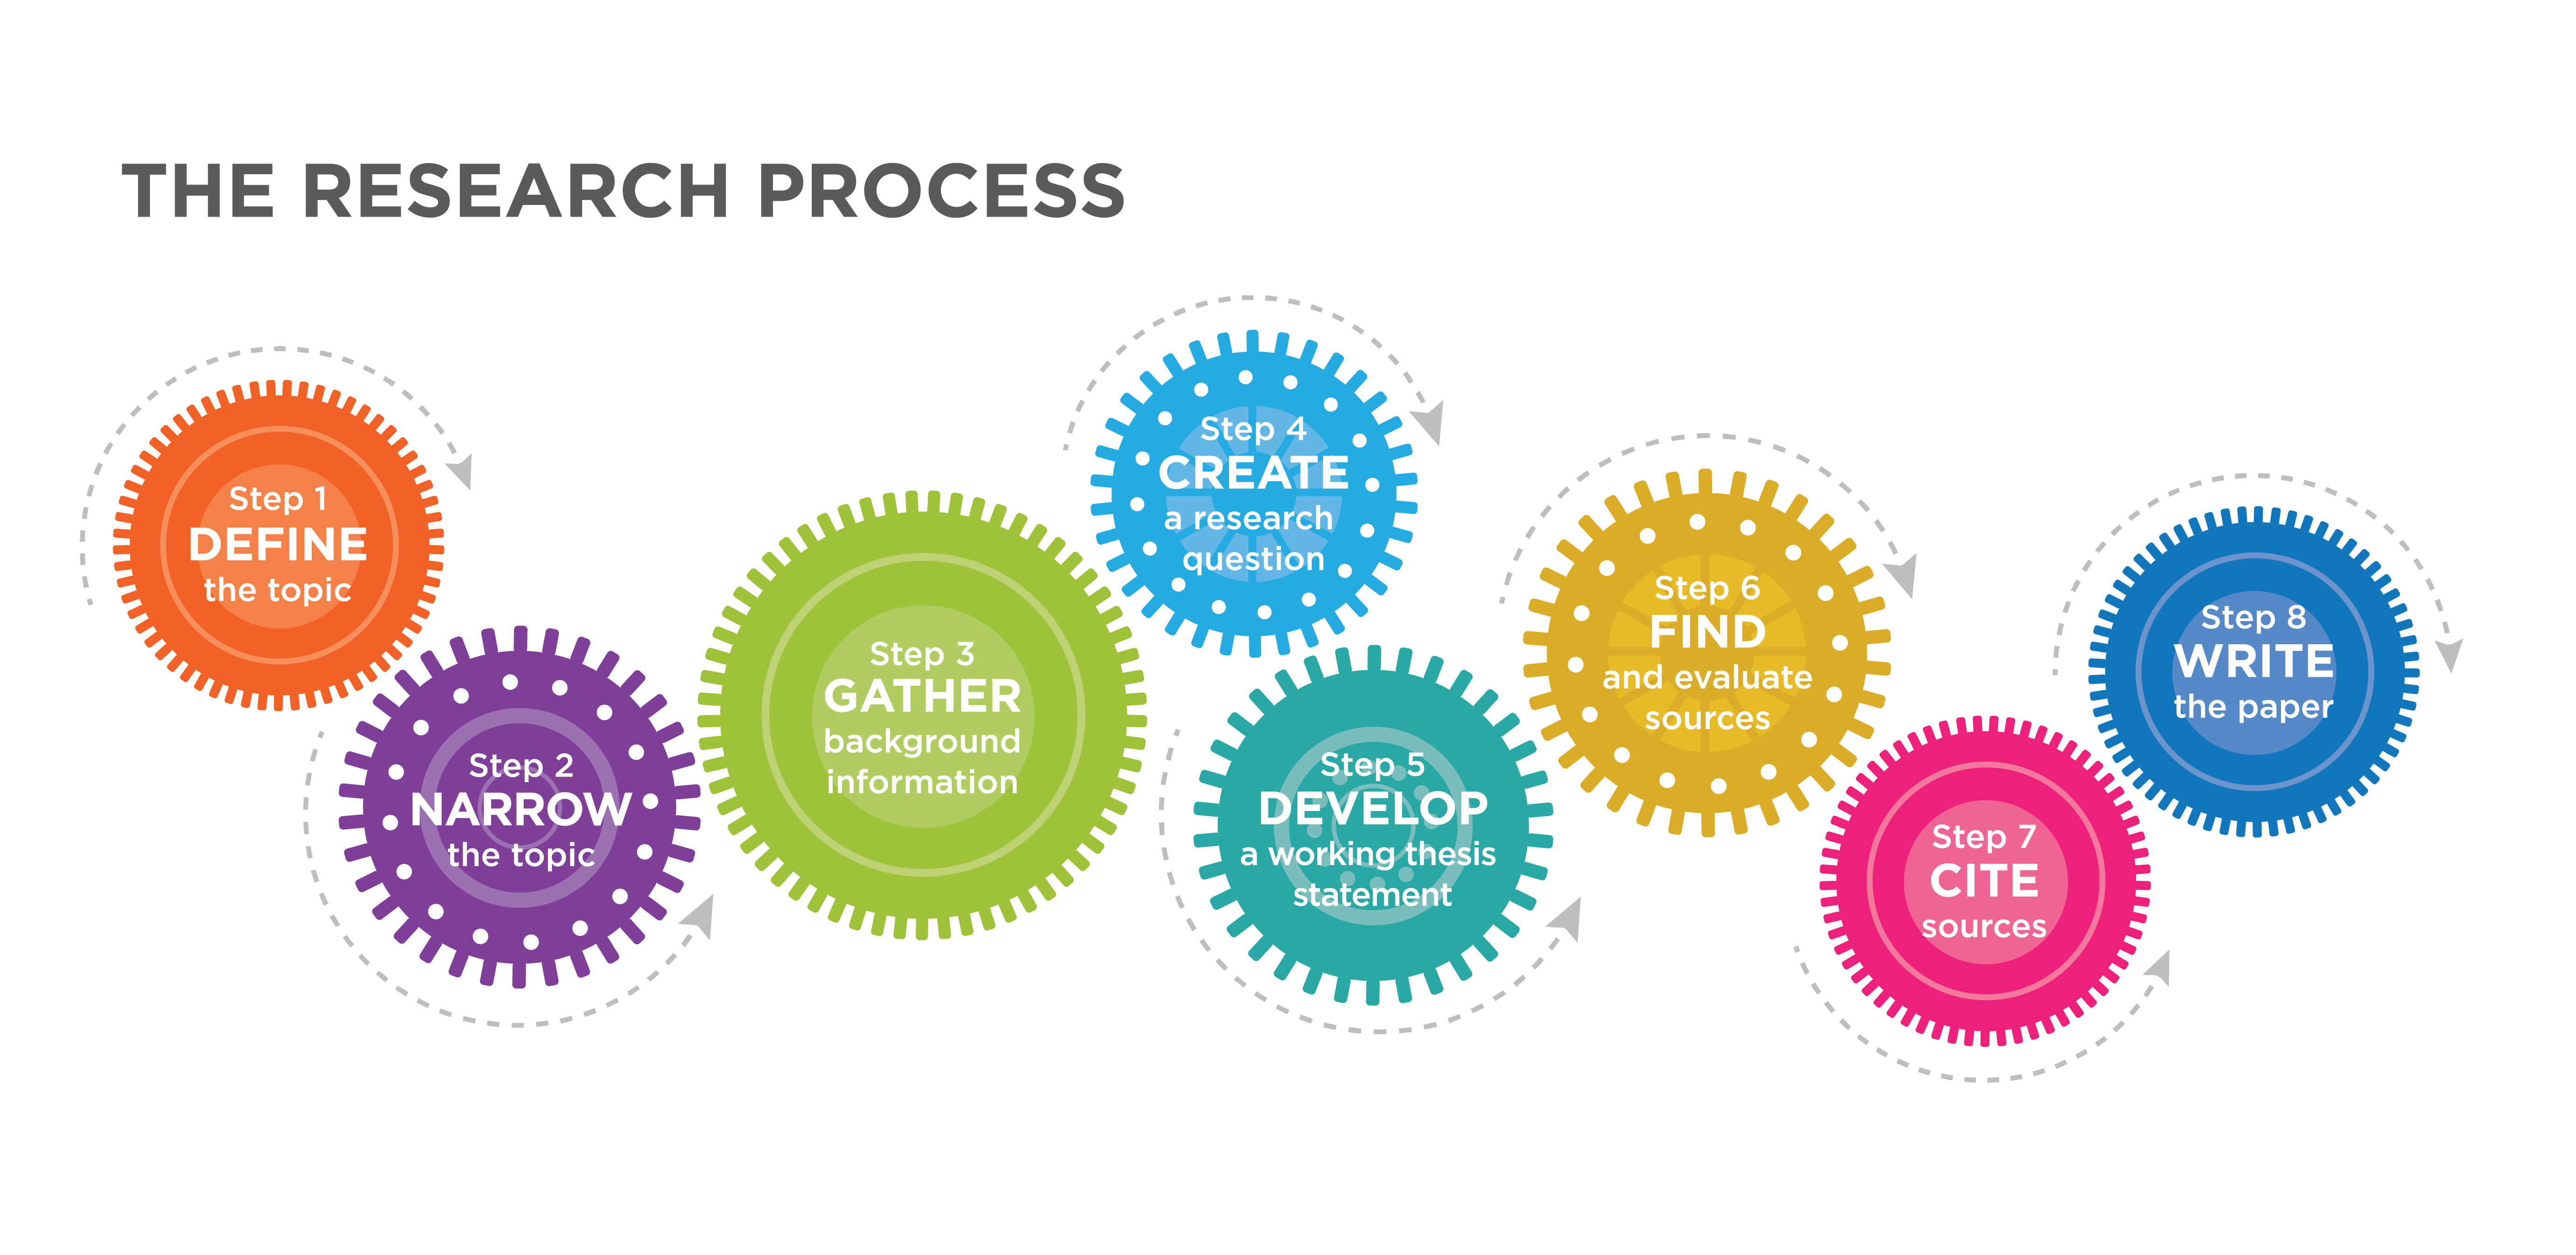 Gears showing the research process: define the topic, narrow the topic, gather background information, create a research question, develop a working thesis statement, find and evaluate sources, cite sources, and write the paper.